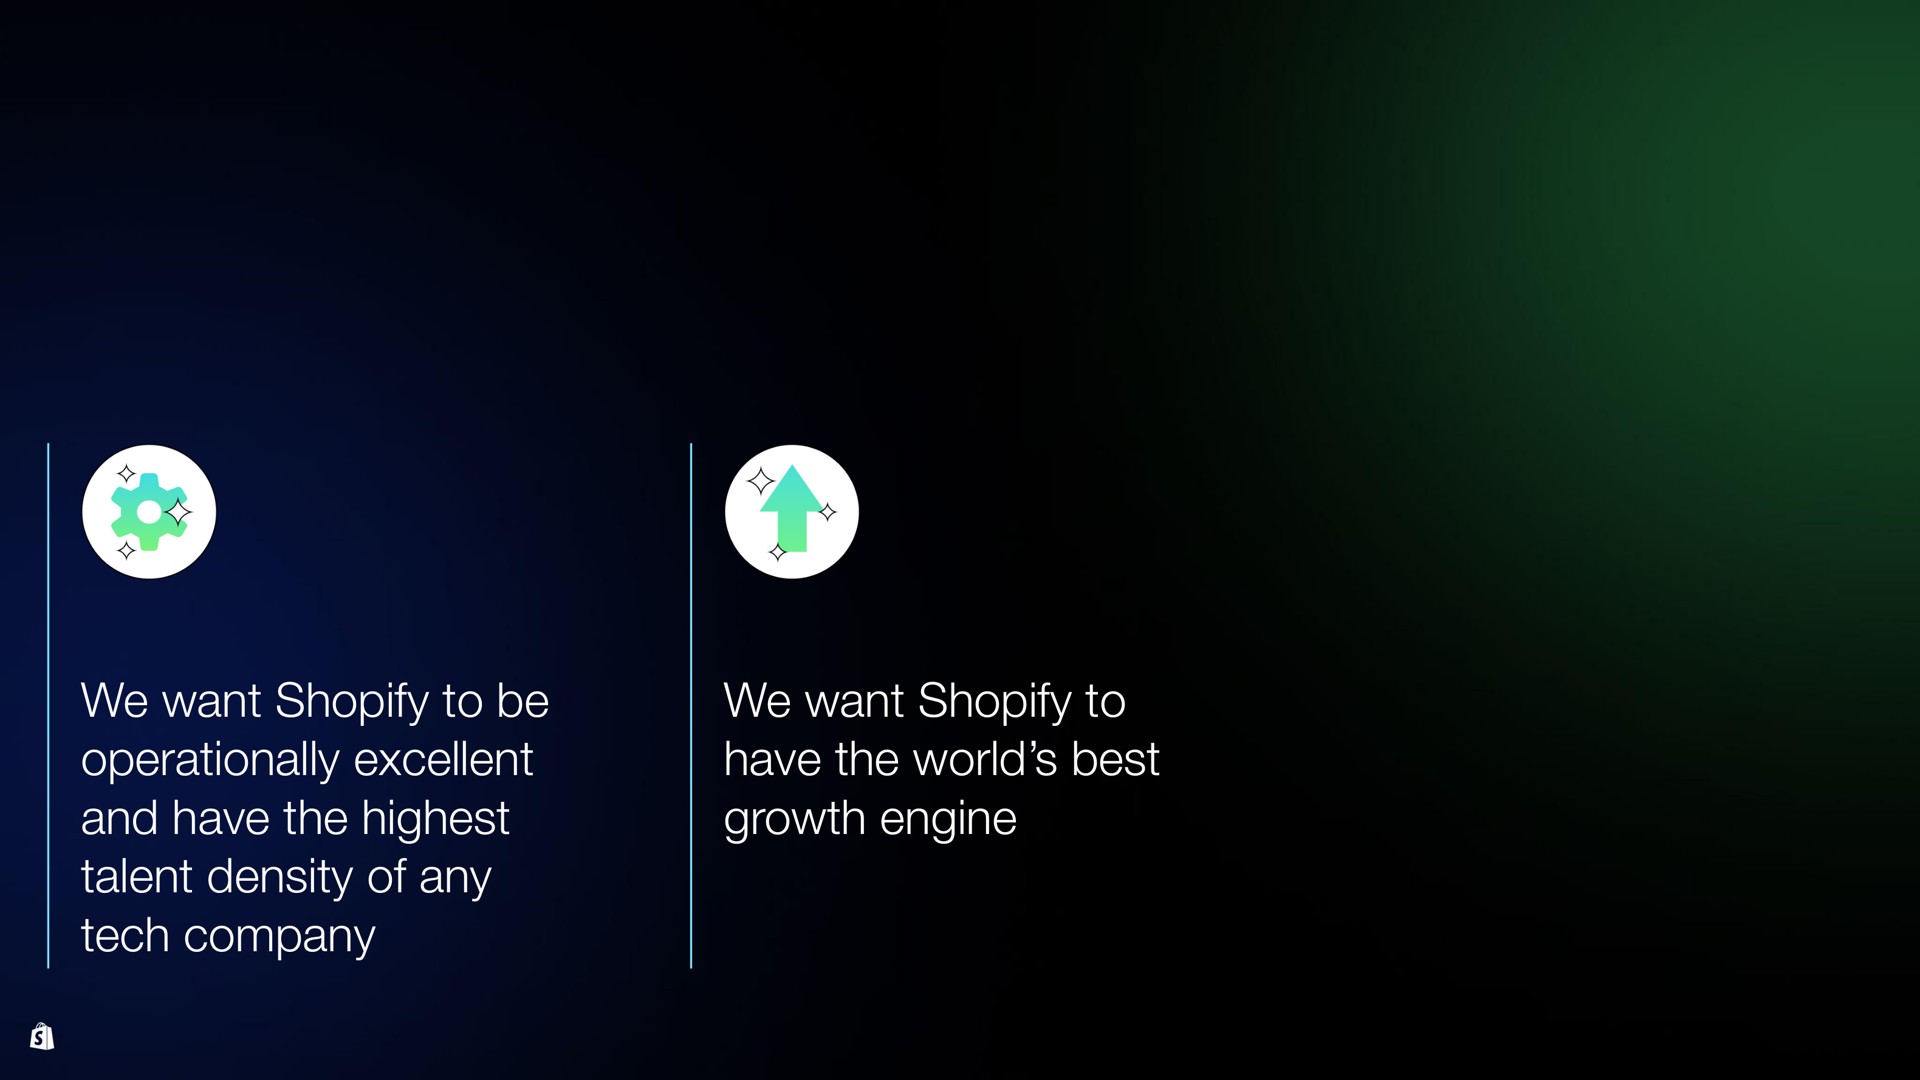 we want to be excellent and have the highest talent density of any tech company we want to have the world best growth engine | Shopify